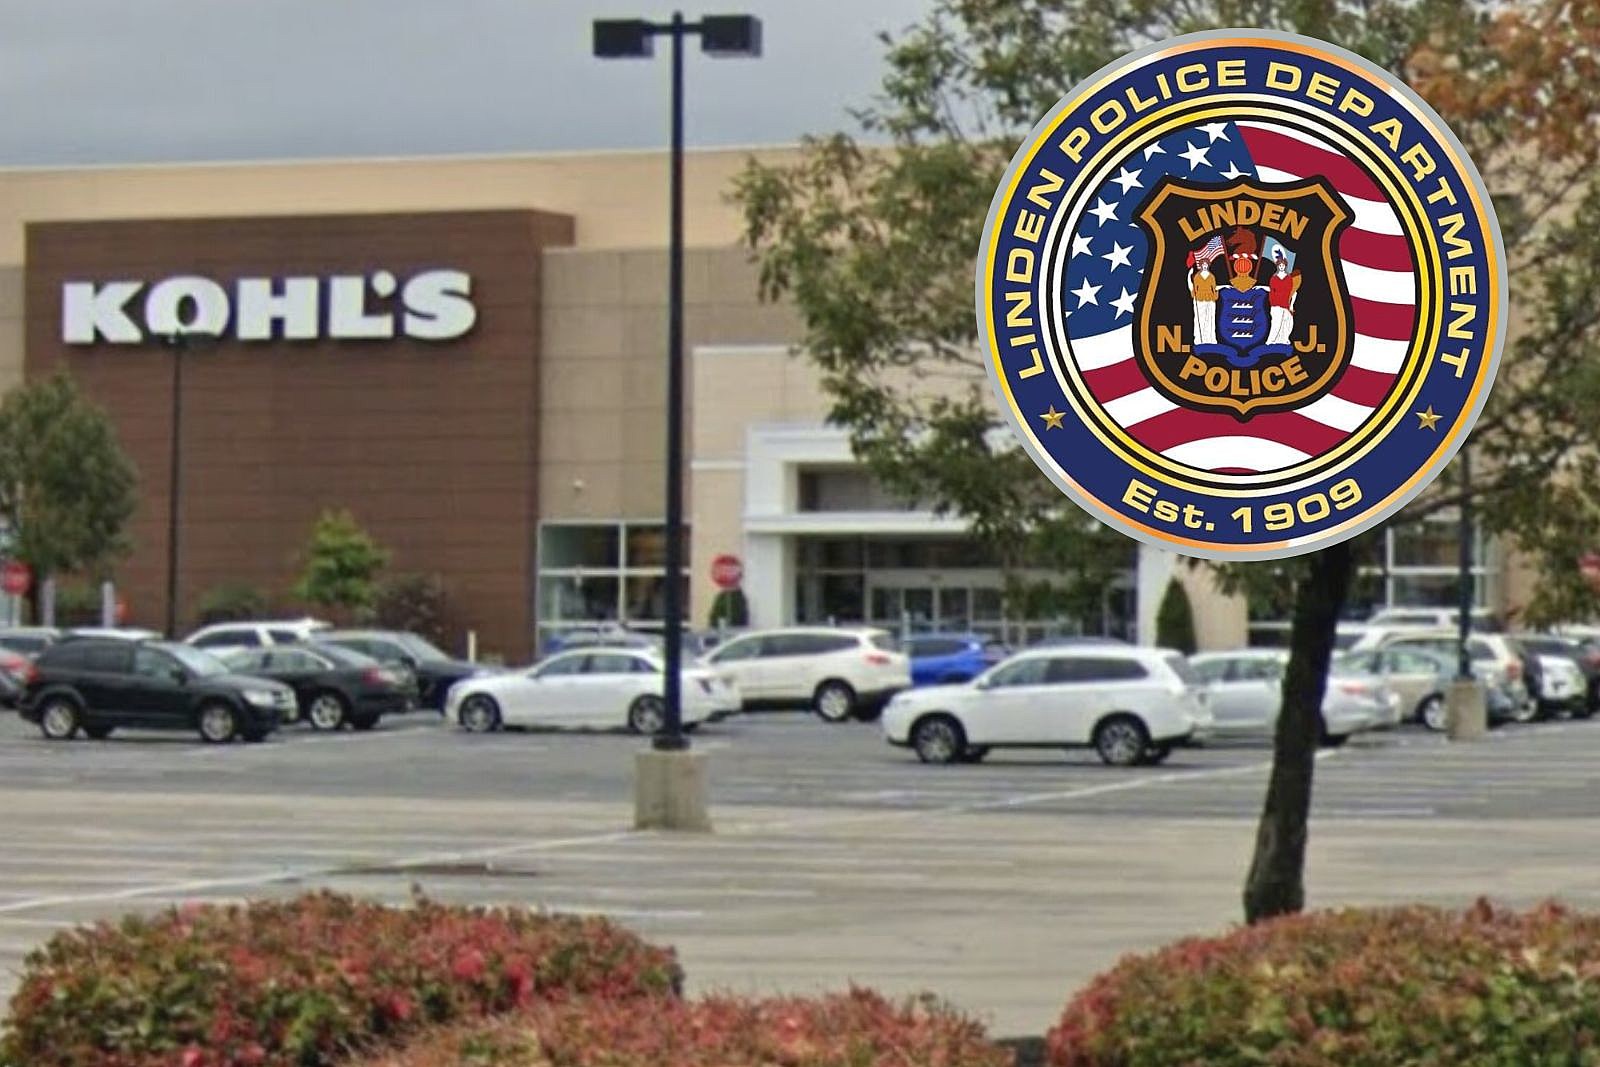 Linden shoplifters may be connected to NJ retail gangs, cops say